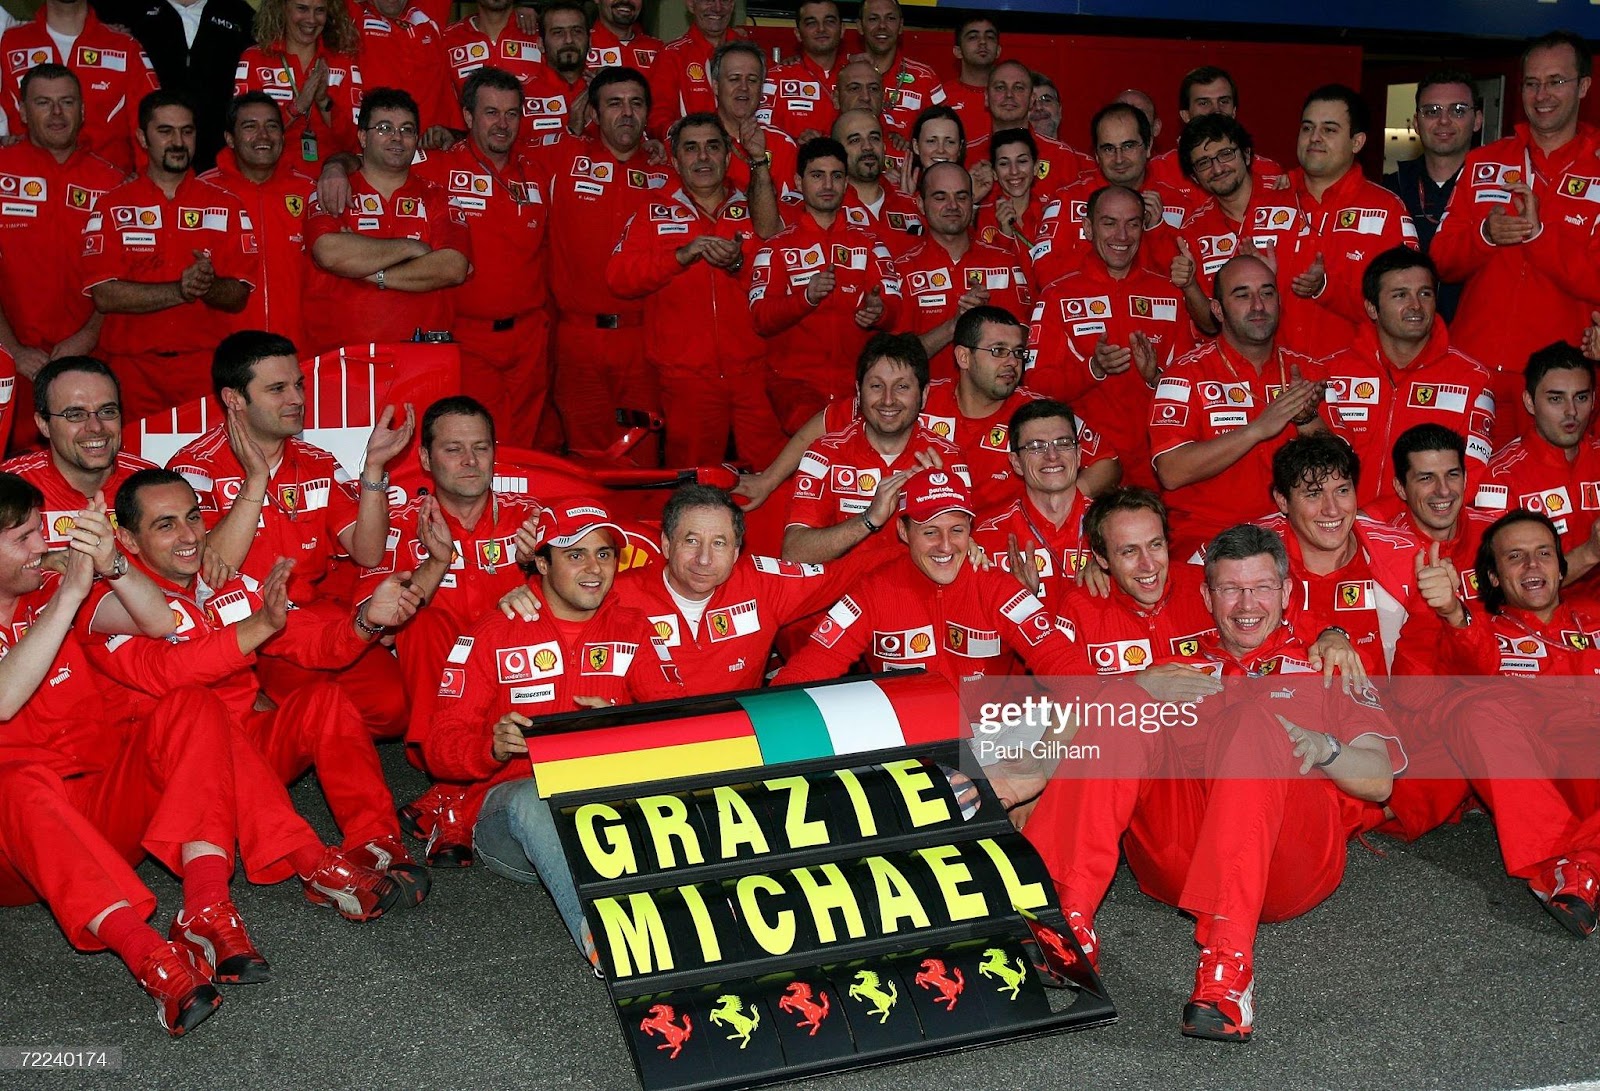 Michael Schumacher and Felipe Massa celebrate with their team-mates at the end of the Brazilian F1 Grand Prix at the Autodromo Interlagos on October 22, 2006 in Sao Paulo, Brazil.